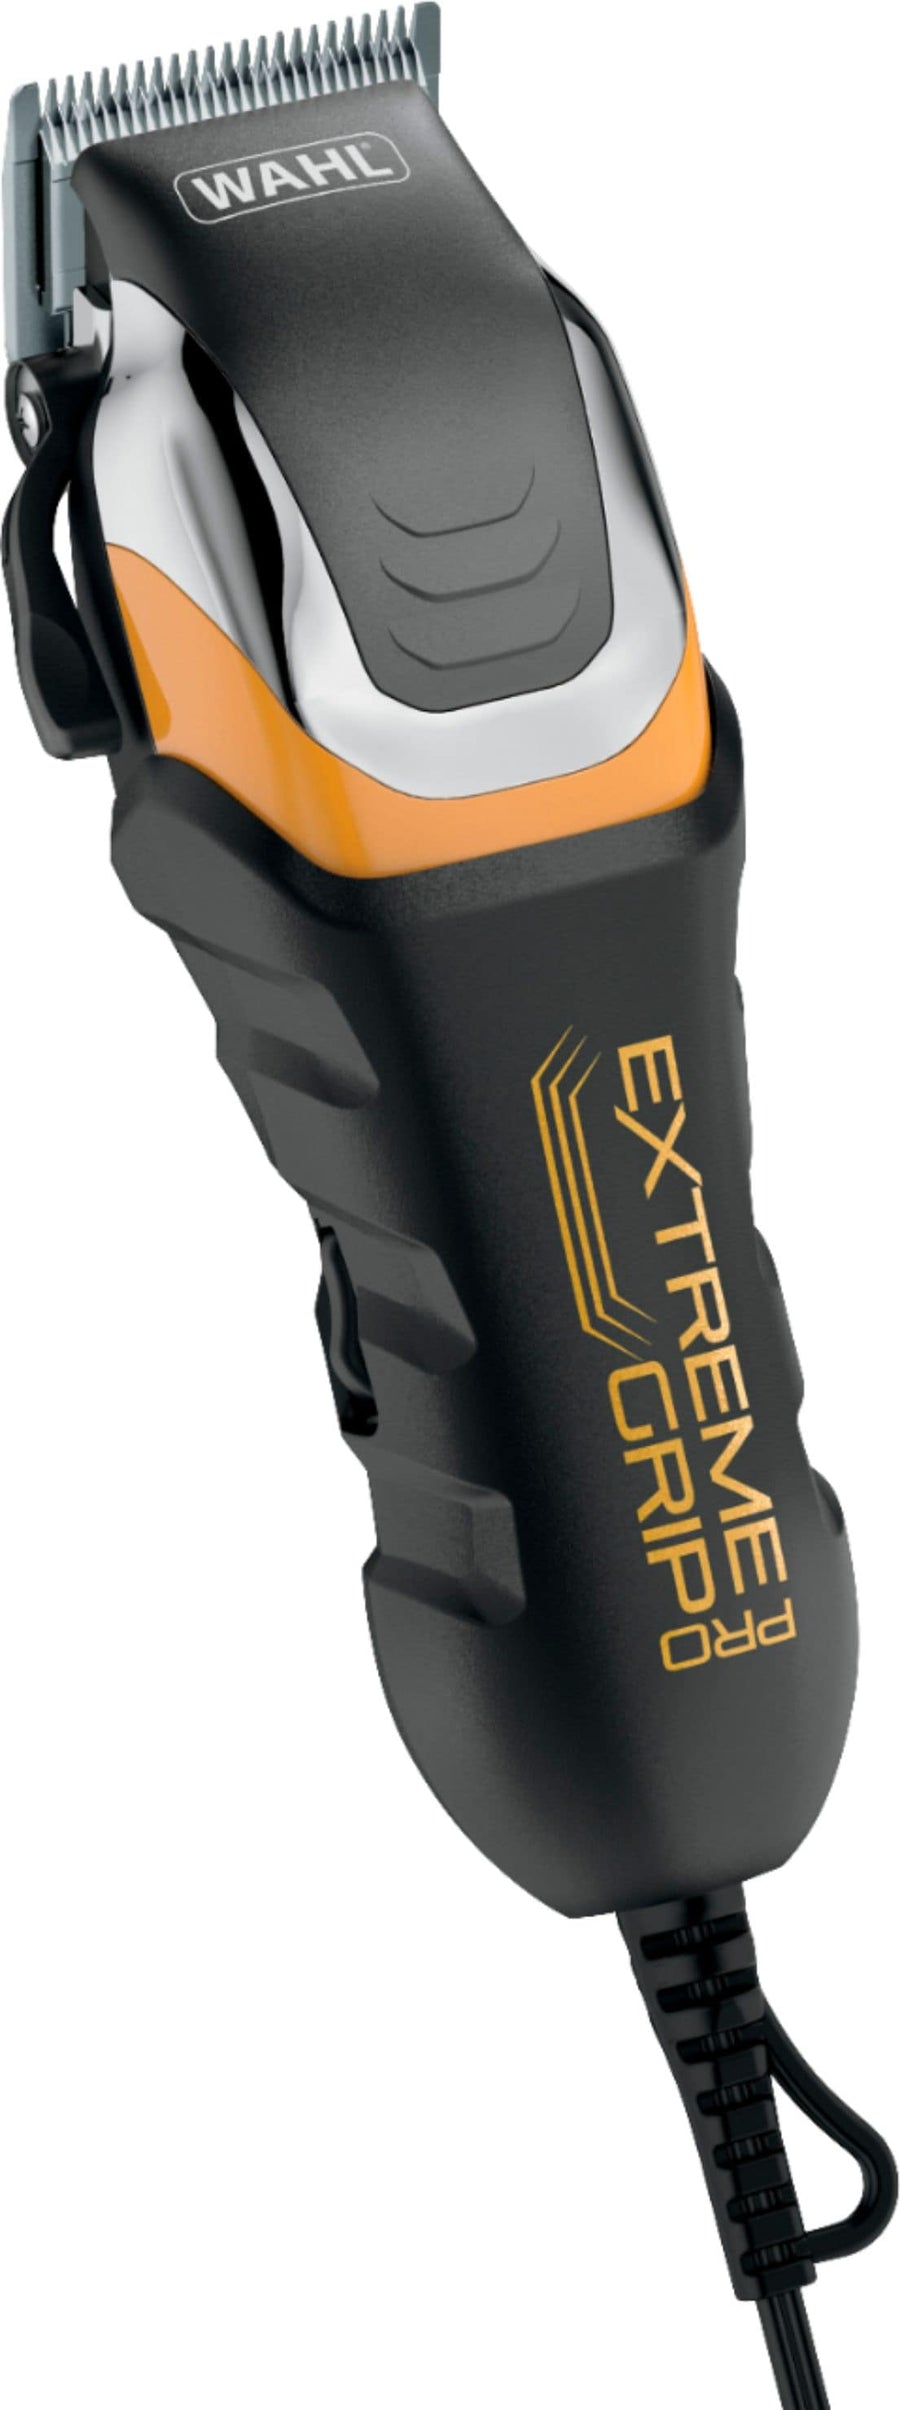 Wahl - Extreme Grip Pro Hair Clipper - Black/Silver/Yellow_0